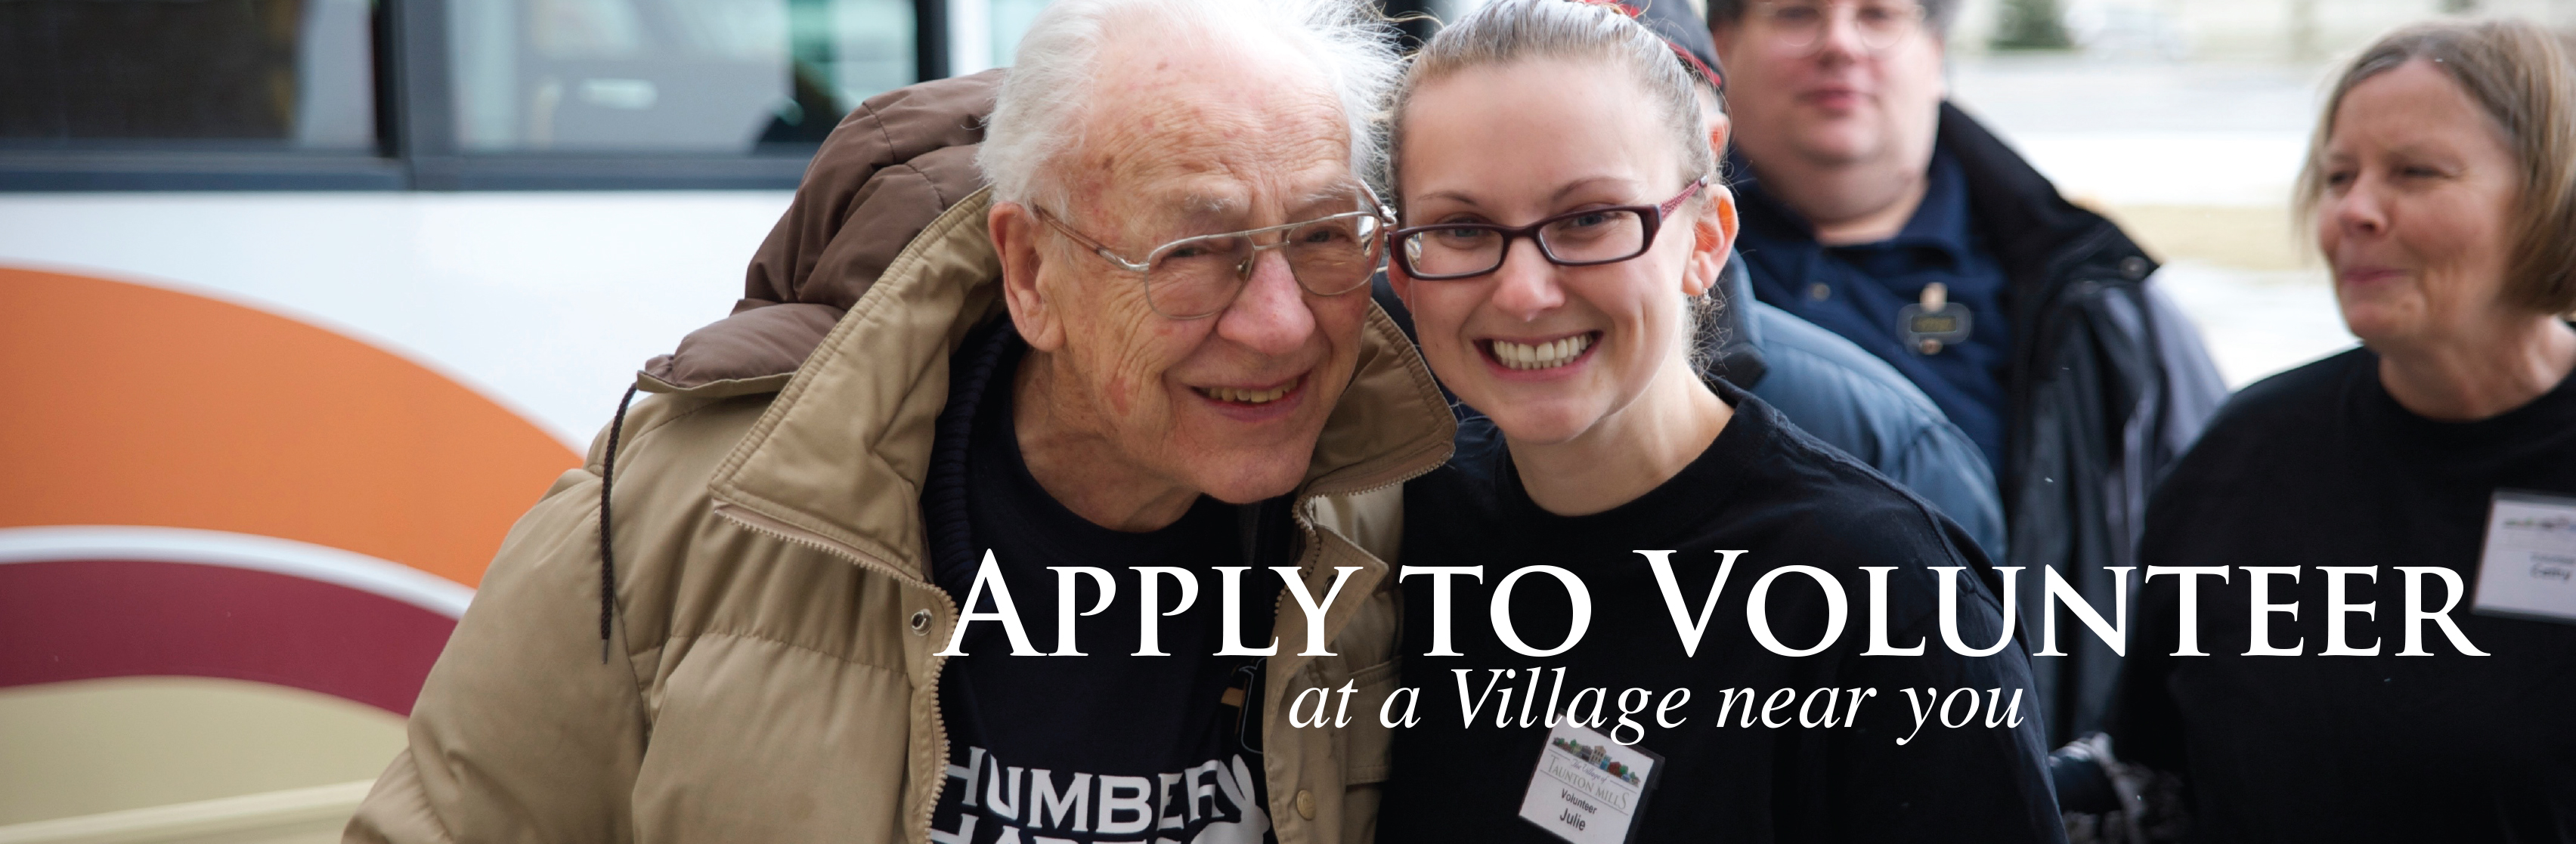 We welcome volunteers in our Villages and have a wide range of opportunities for you to make a difference in the lives of our residents. Discover the joy and fulfillment of volunteering with seniors.